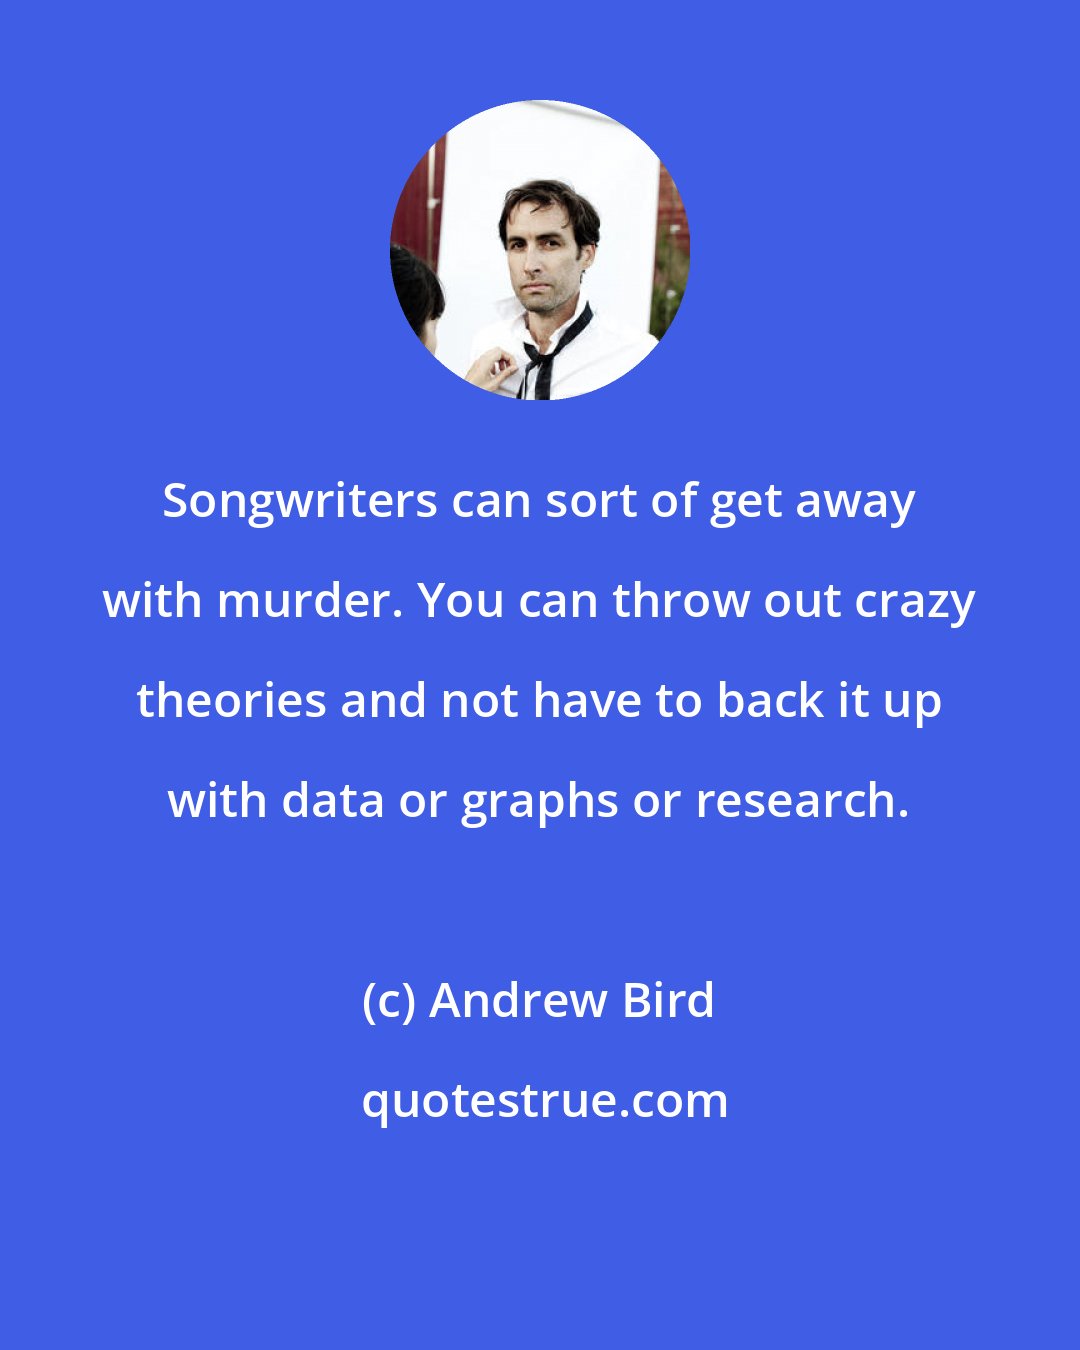 Andrew Bird: Songwriters can sort of get away with murder. You can throw out crazy theories and not have to back it up with data or graphs or research.